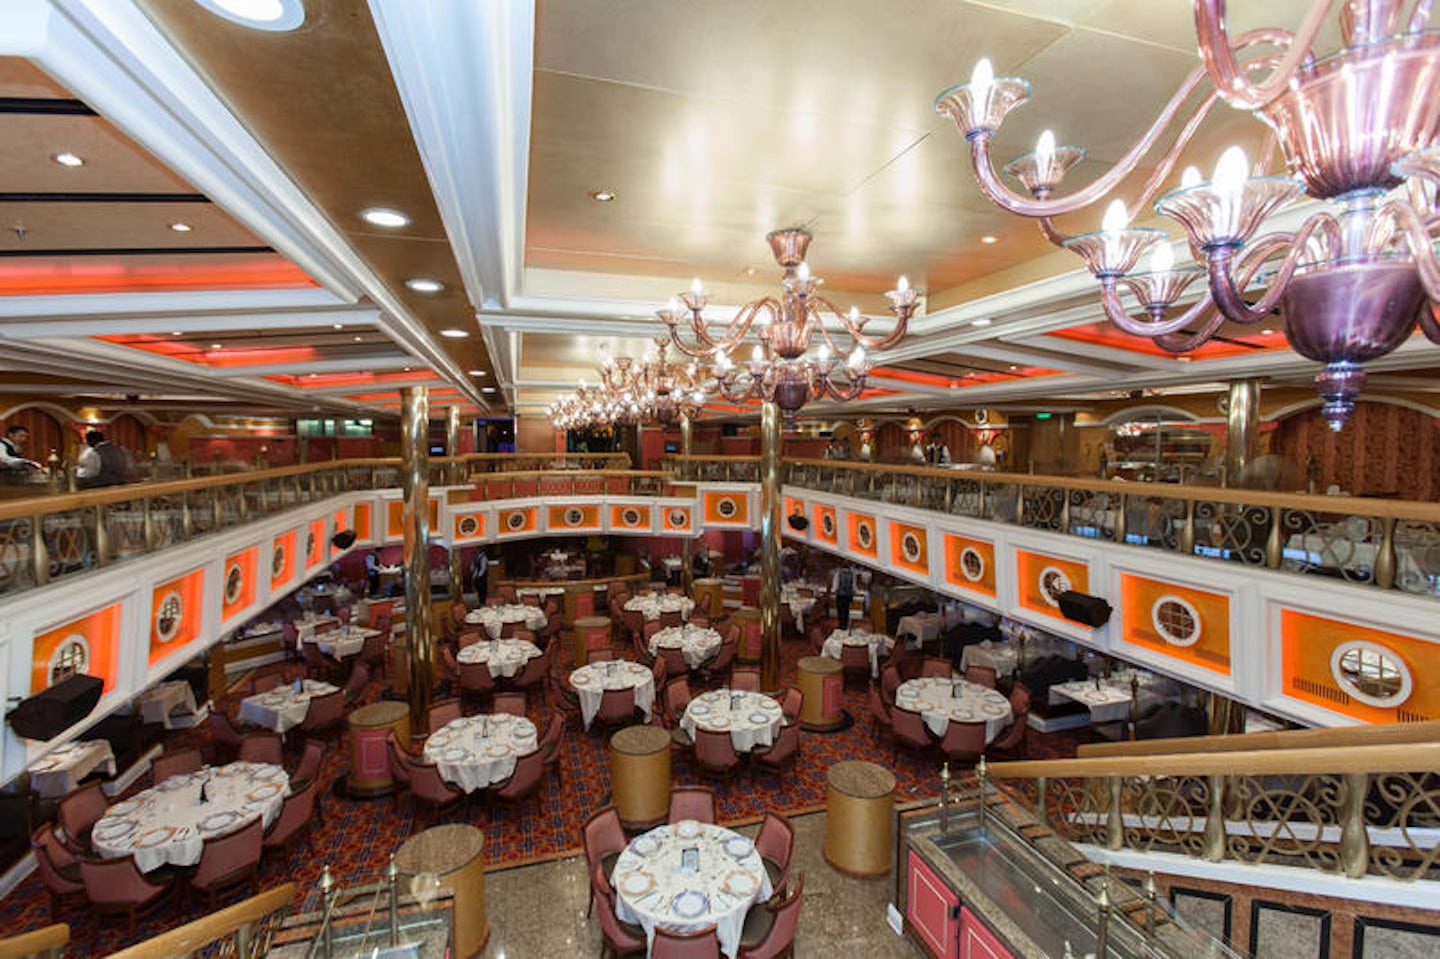 Lincoln Dining Room on Carnival Valor